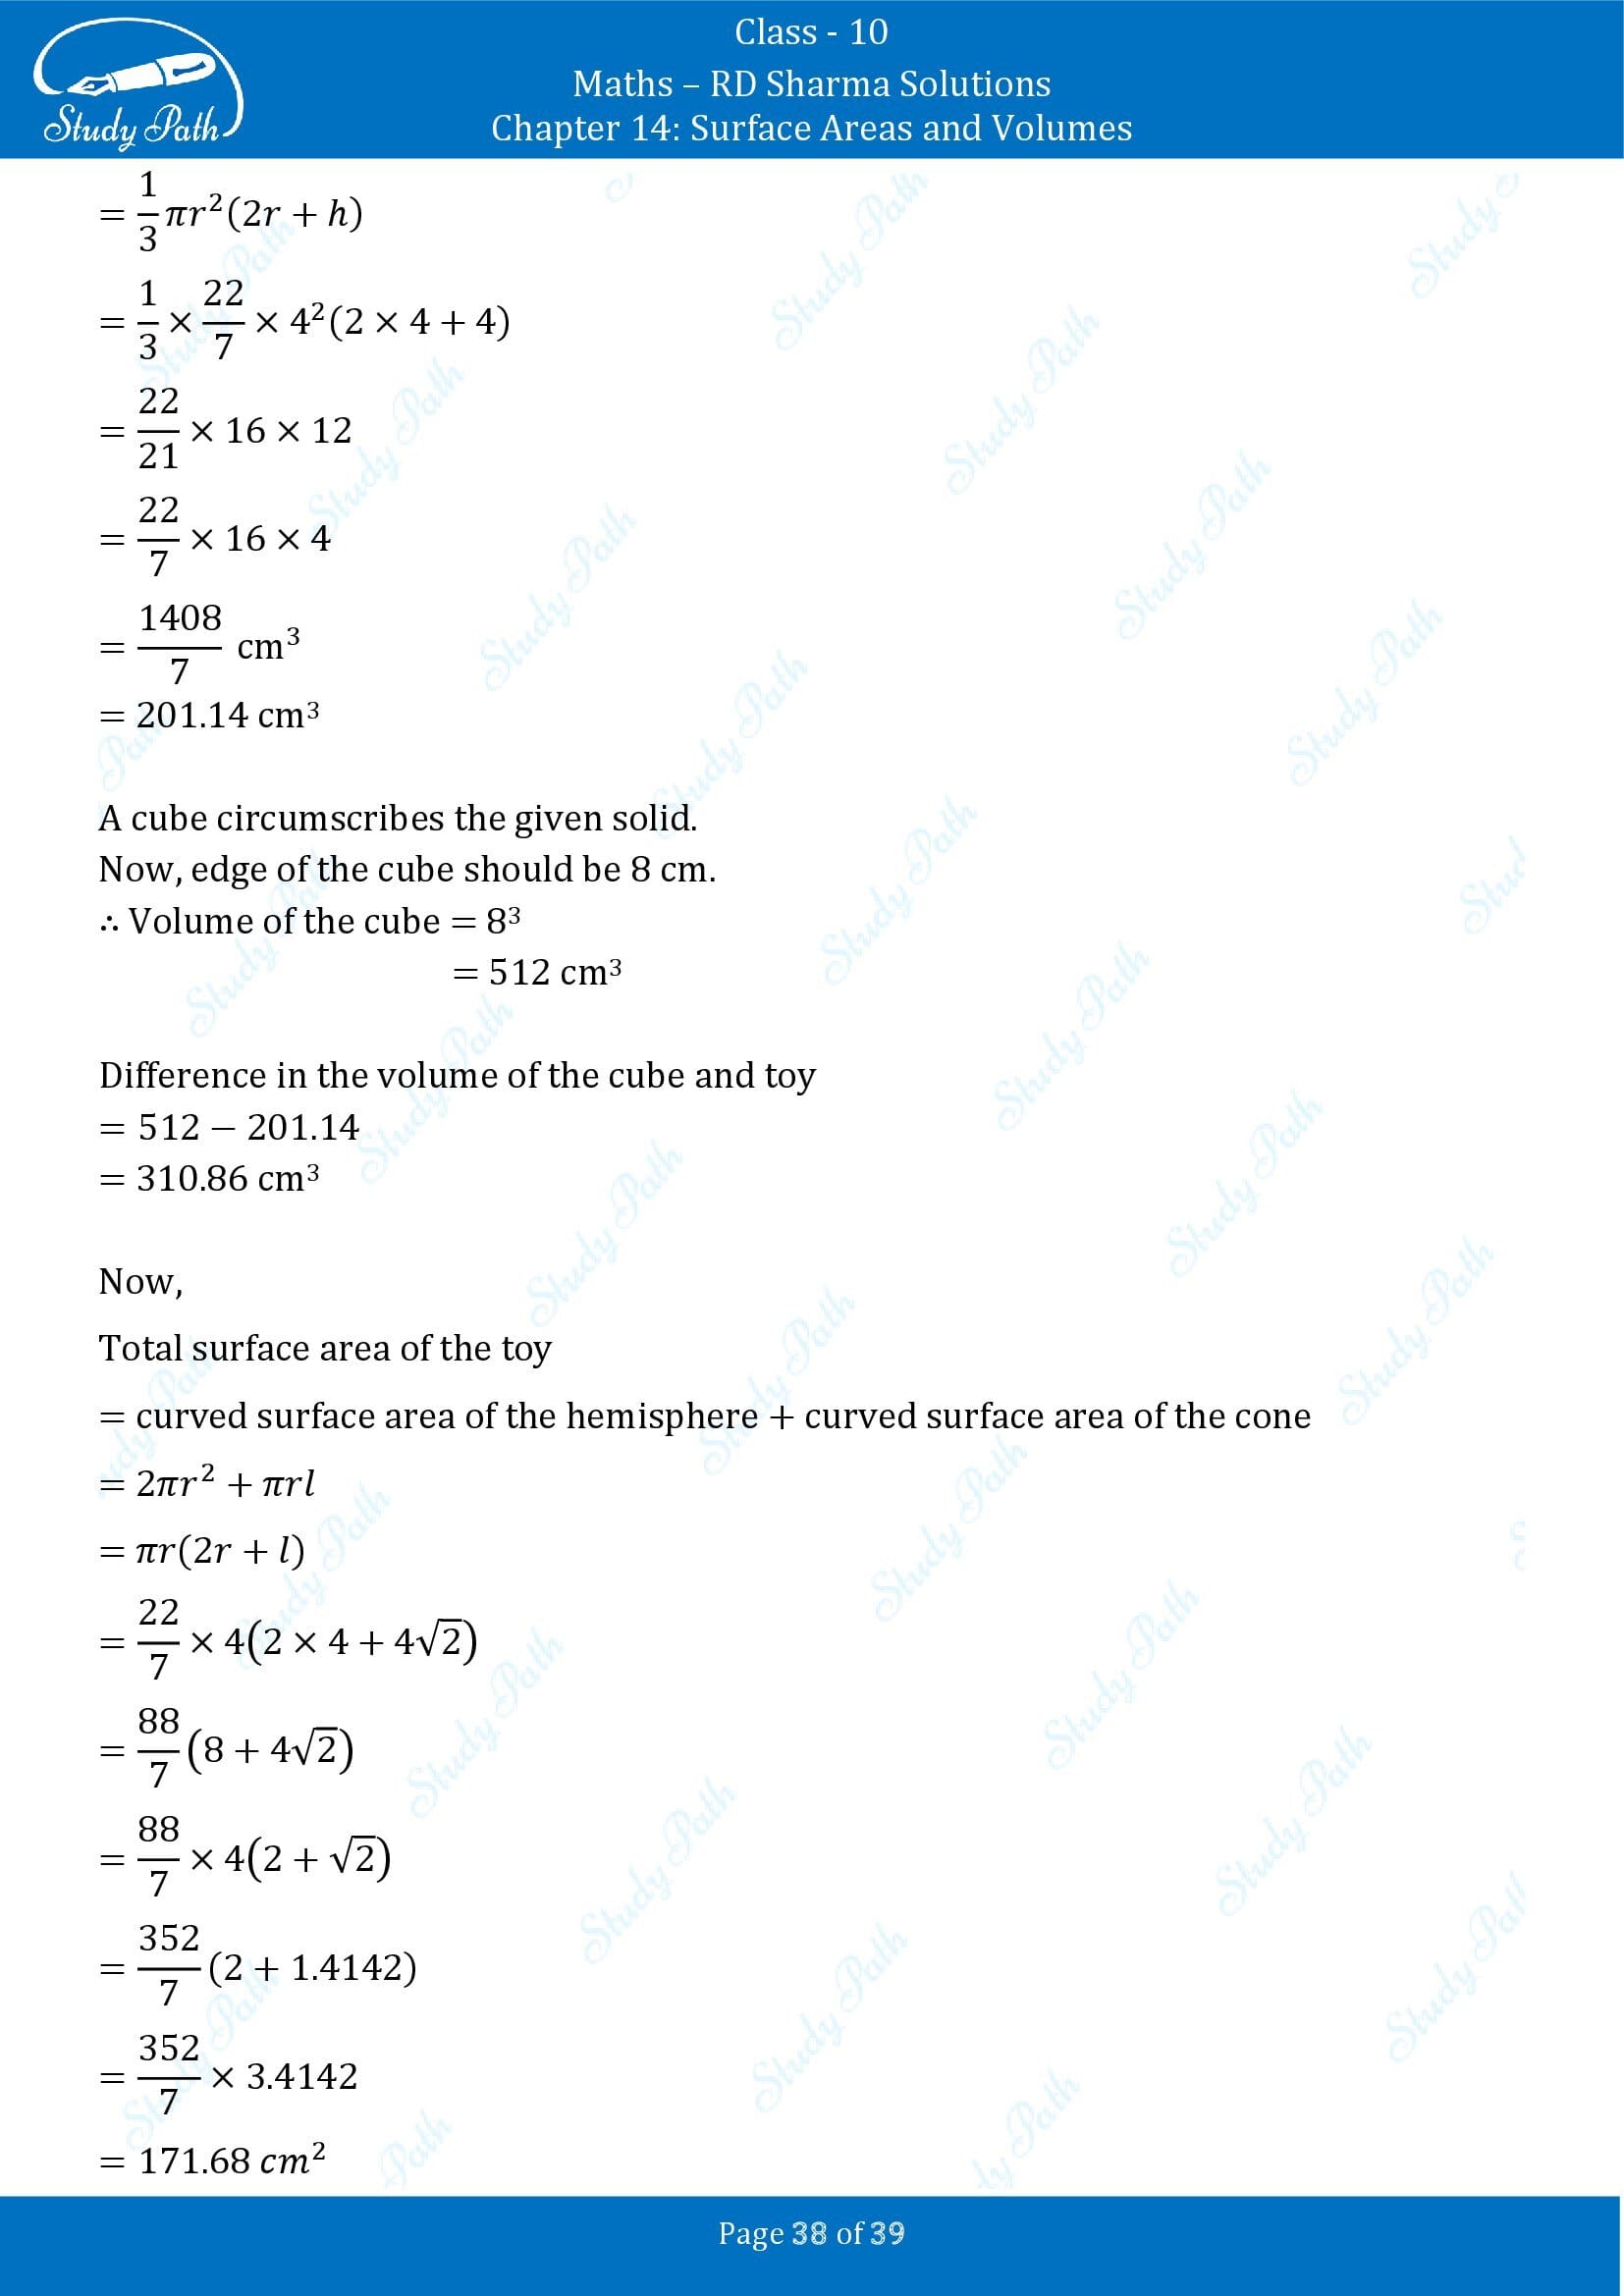 RD Sharma Solutions Class 10 Chapter 14 Surface Areas and Volumes Exercise 14.2 00038